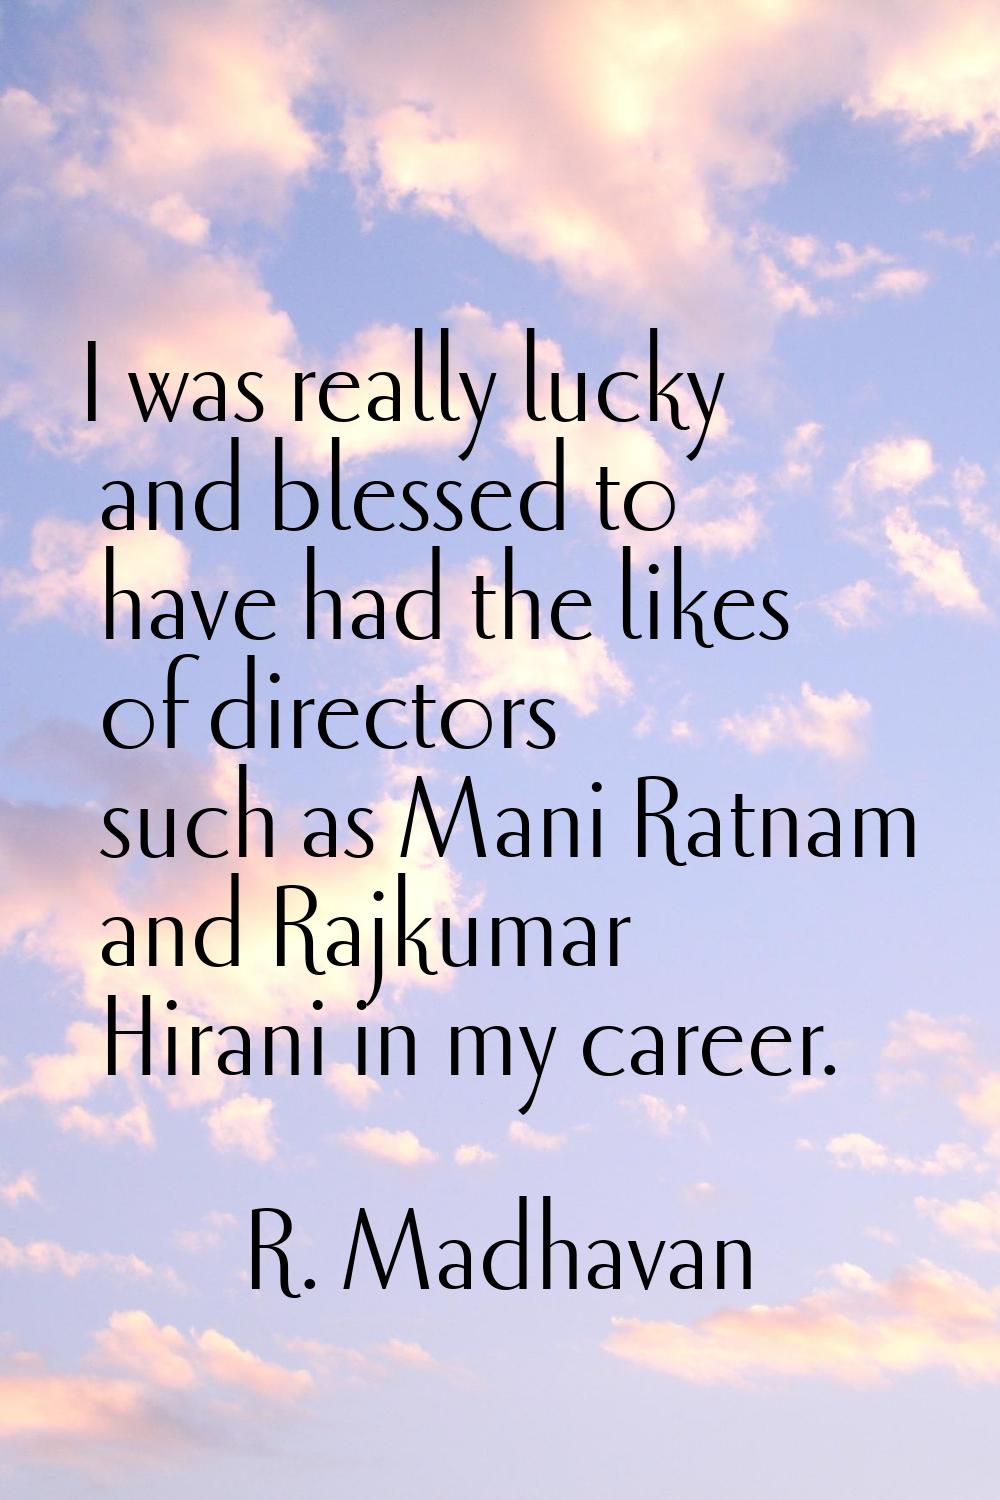 I was really lucky and blessed to have had the likes of directors such as Mani Ratnam and Rajkumar 